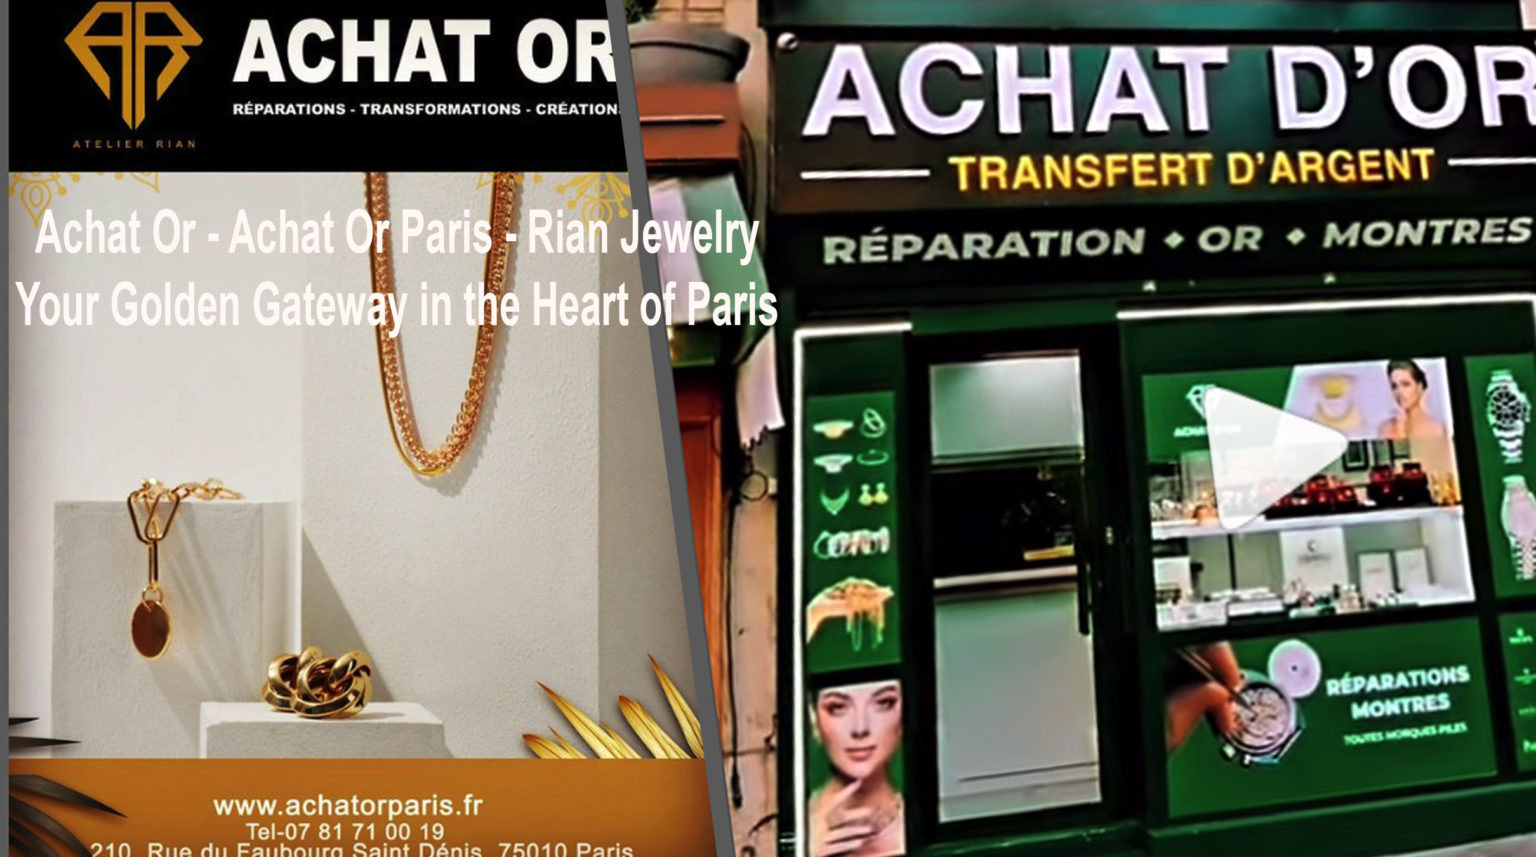 ACHAT-OR-PARIS-ACHAT-OR-PARIS-10-BIJOUTERIE-RIAN-Rian-Jewelry-Diamond-House-Your-Golden-Gateway-in-the-Heart-of-Paris-DN-AFRICA-Media-Partner